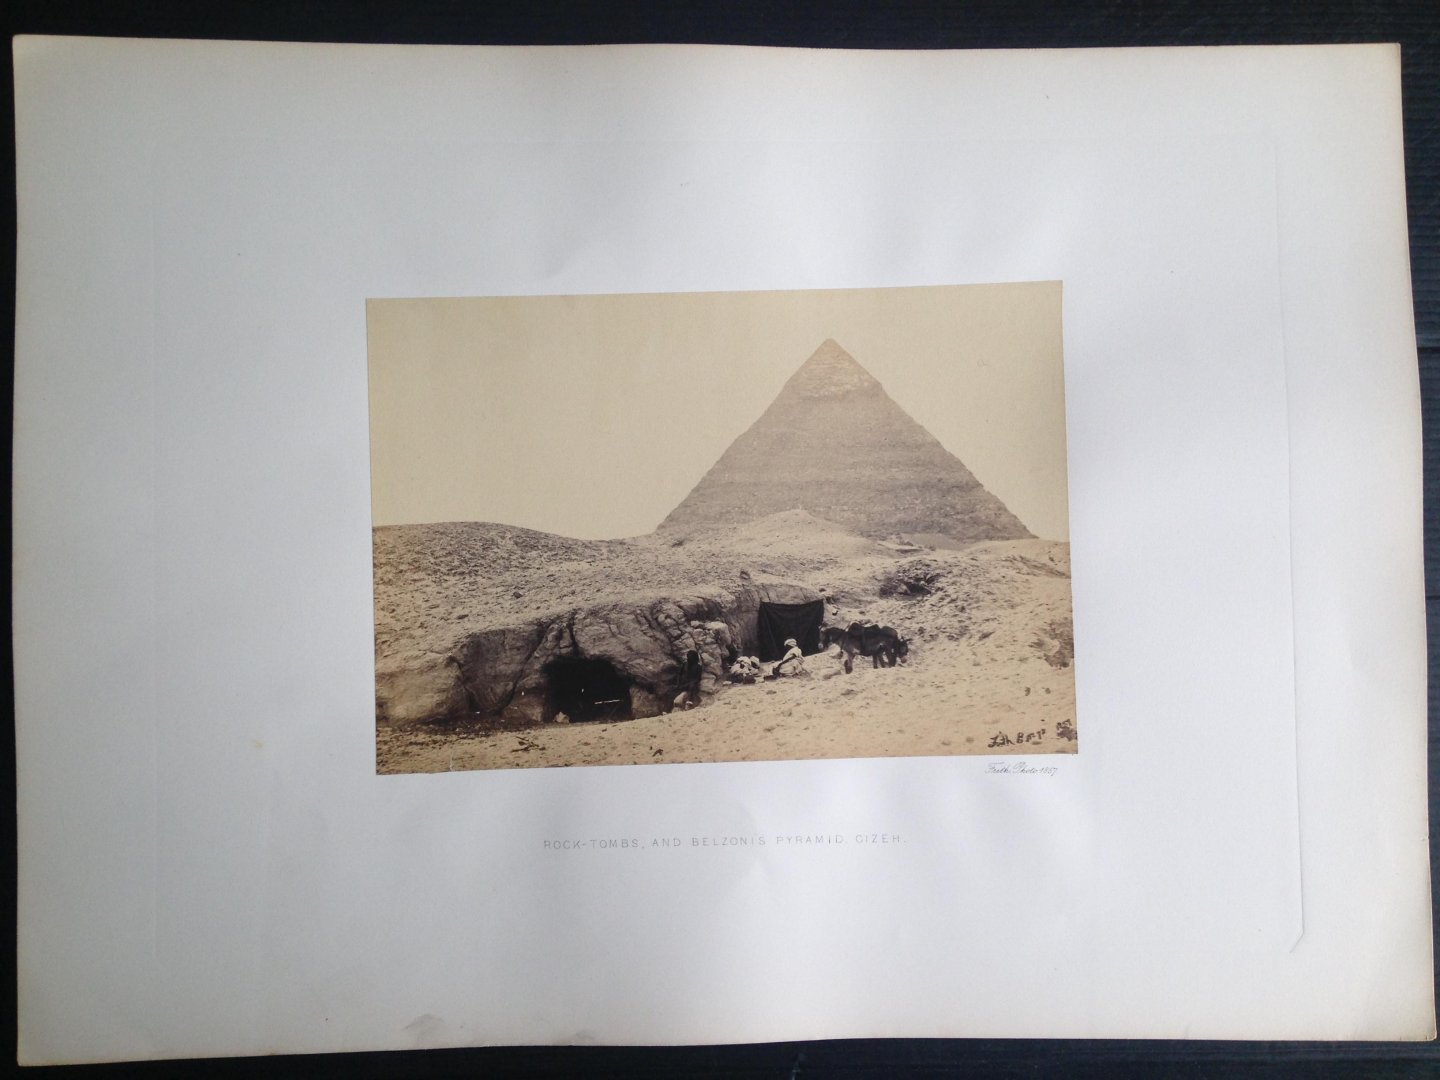 Frith, Francis - Rock-Tombs and Belzoni’s Pyramid, Gizeh, Series Egypt and Palestine